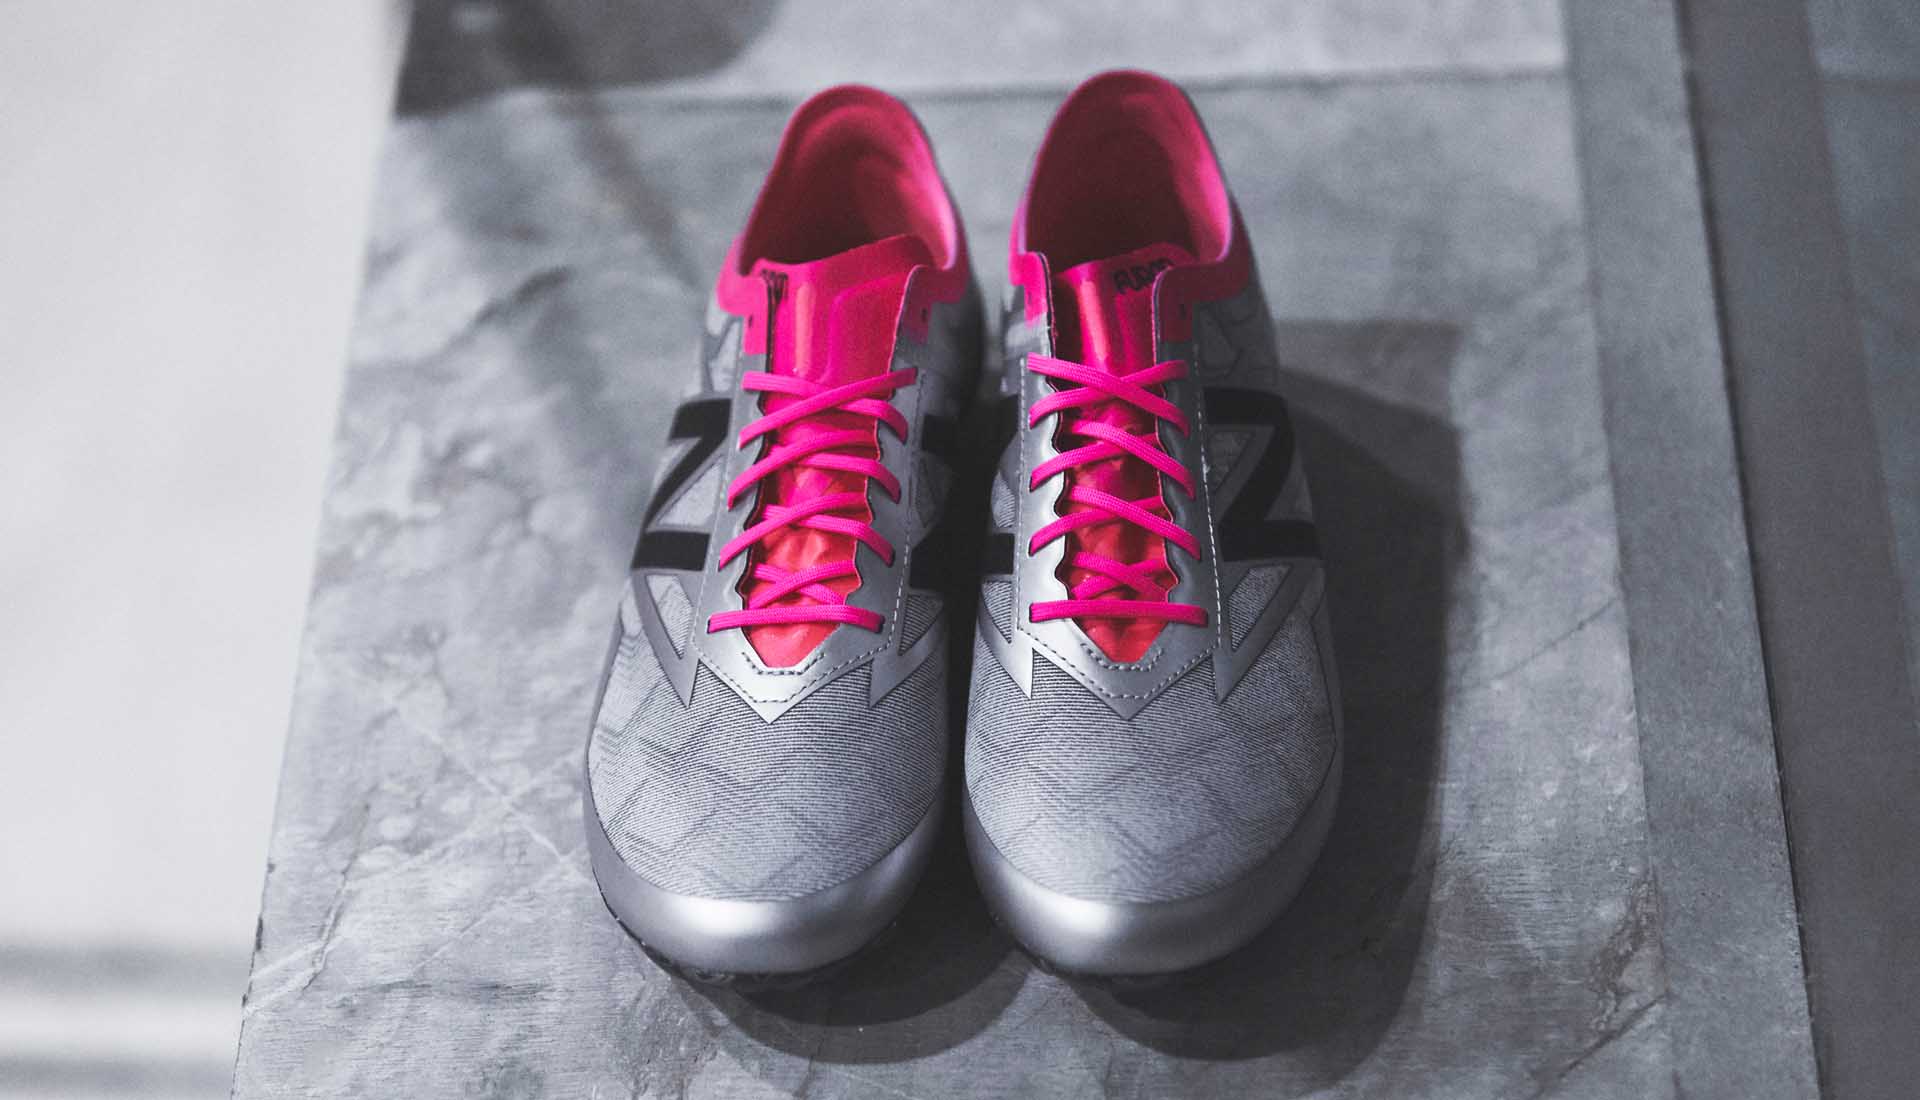 furon 3.0 limited edition